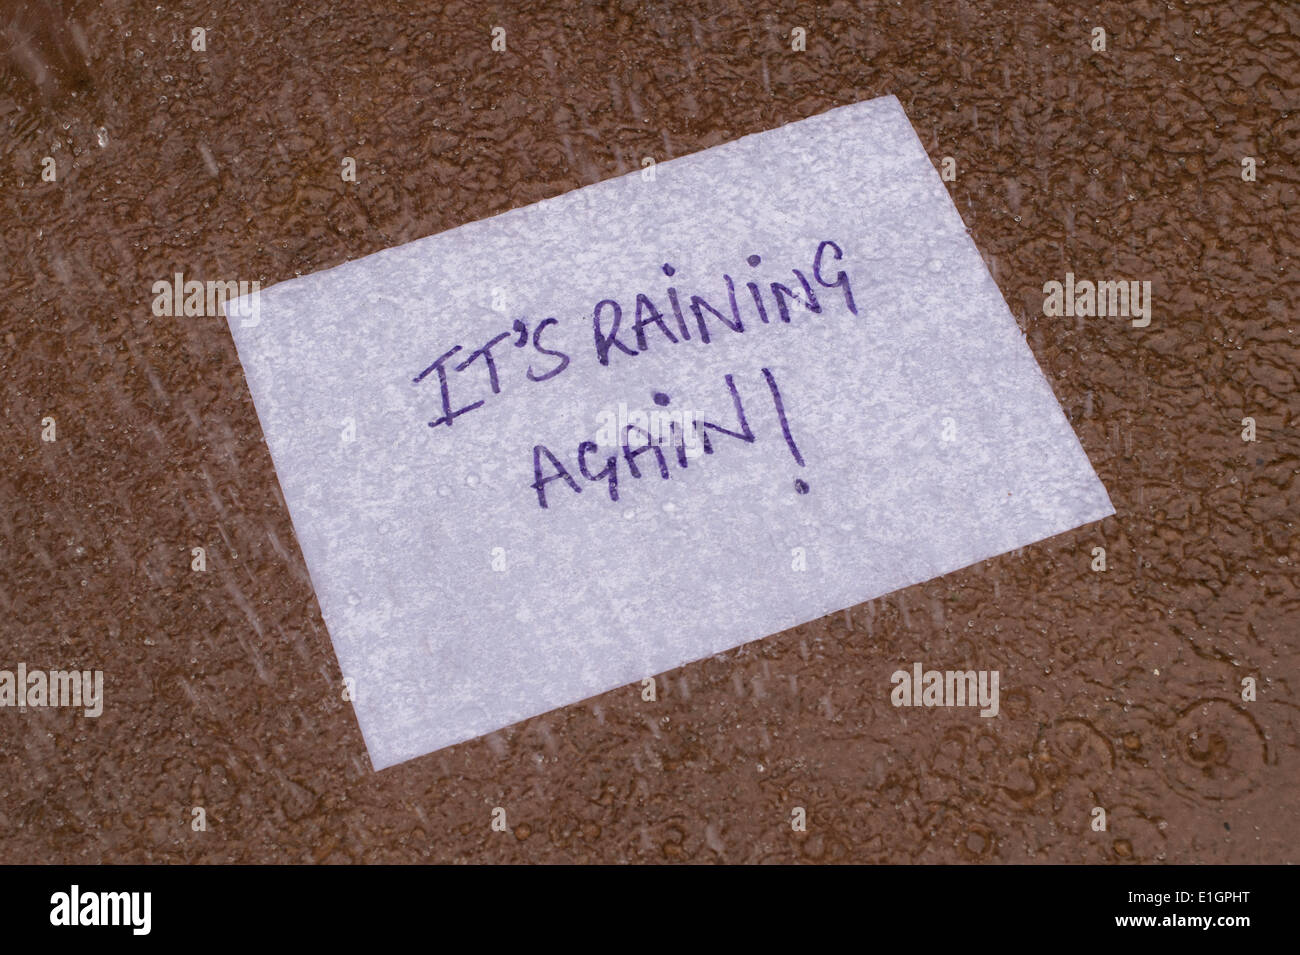 Its Raining Again written on a piece of paper in a puddle in the rain Stock Photo